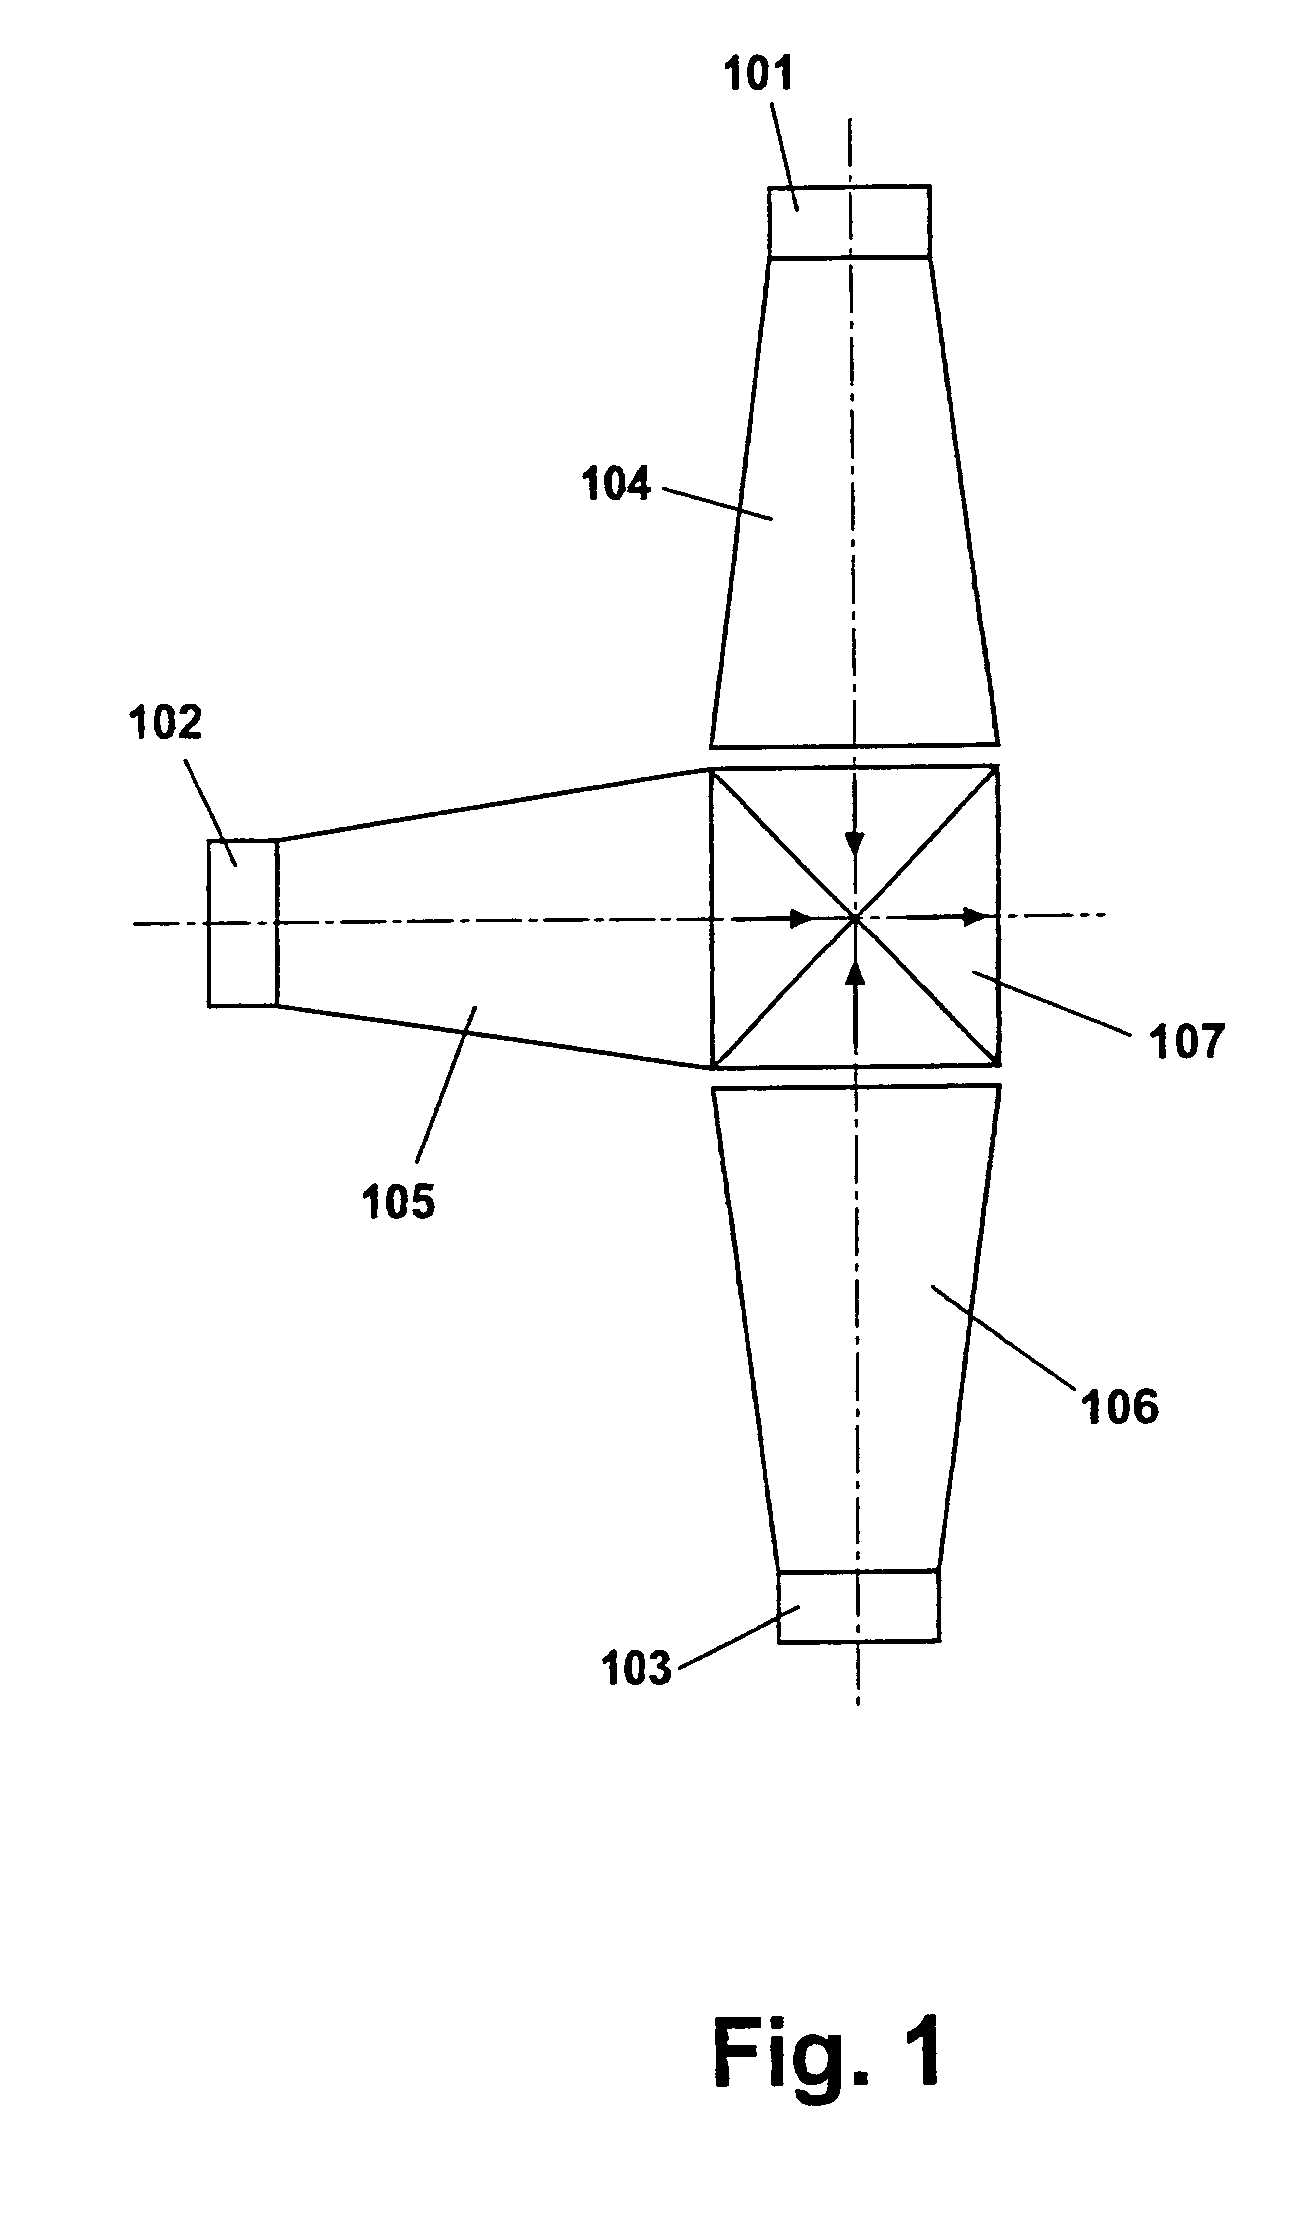 Light-emitting diode (LED) illumination system for a digital micro-mirror device (DMD) and method of providing same